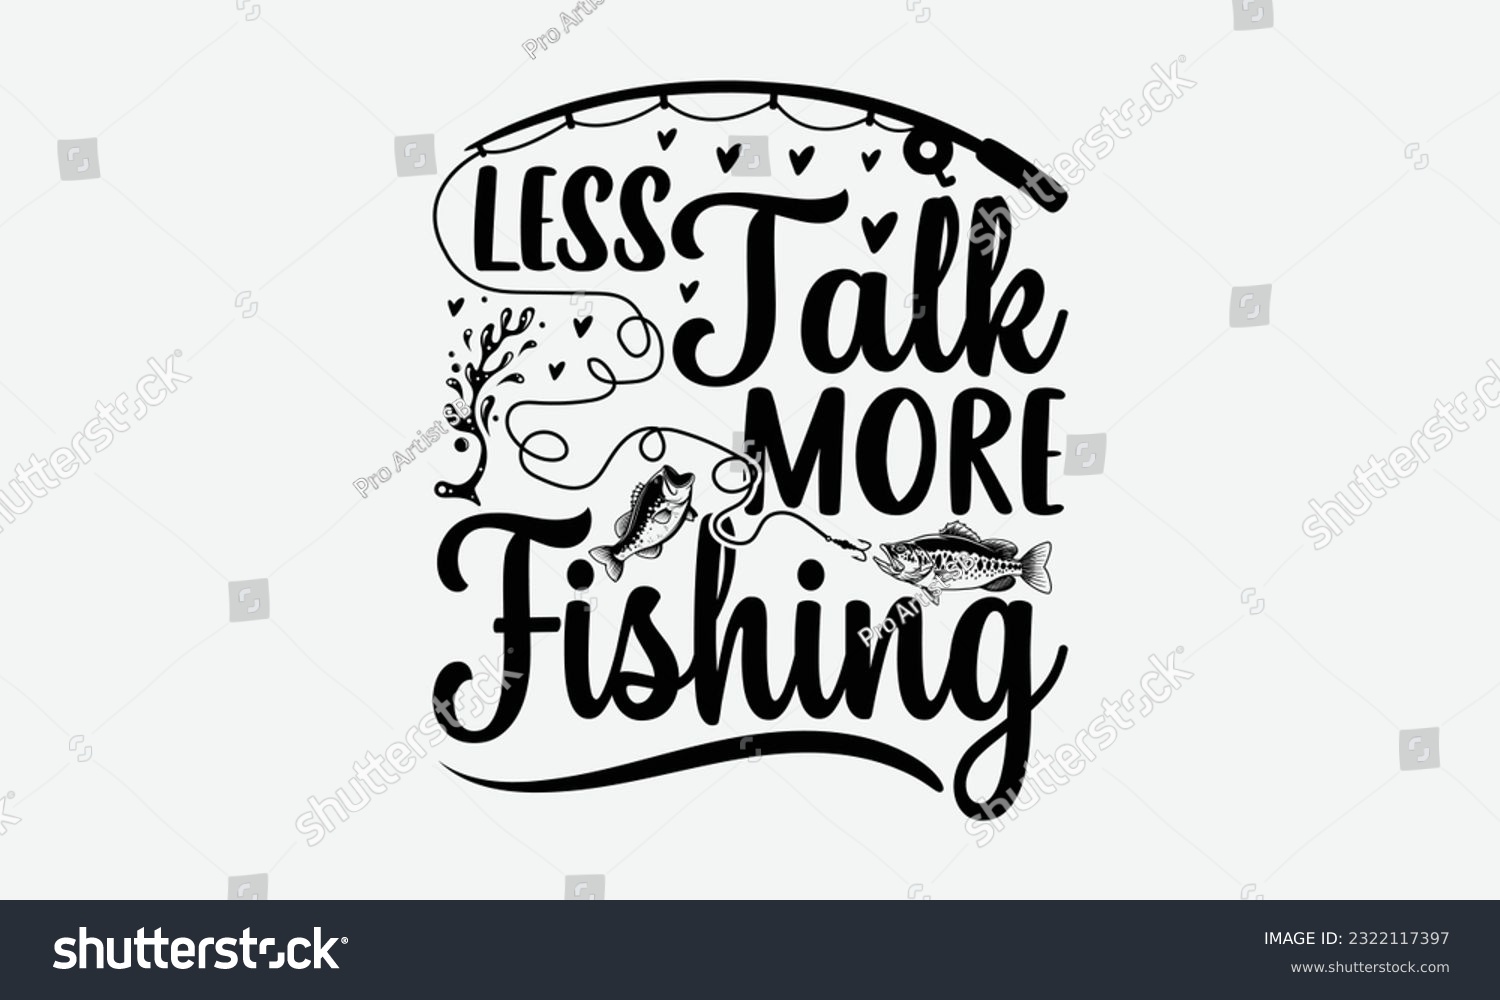 SVG of Less Talk More Fishing - Fishing SVG Design, Isolated On White Background, For Cutting Machine, Silhouette Cameo, Cricut. svg